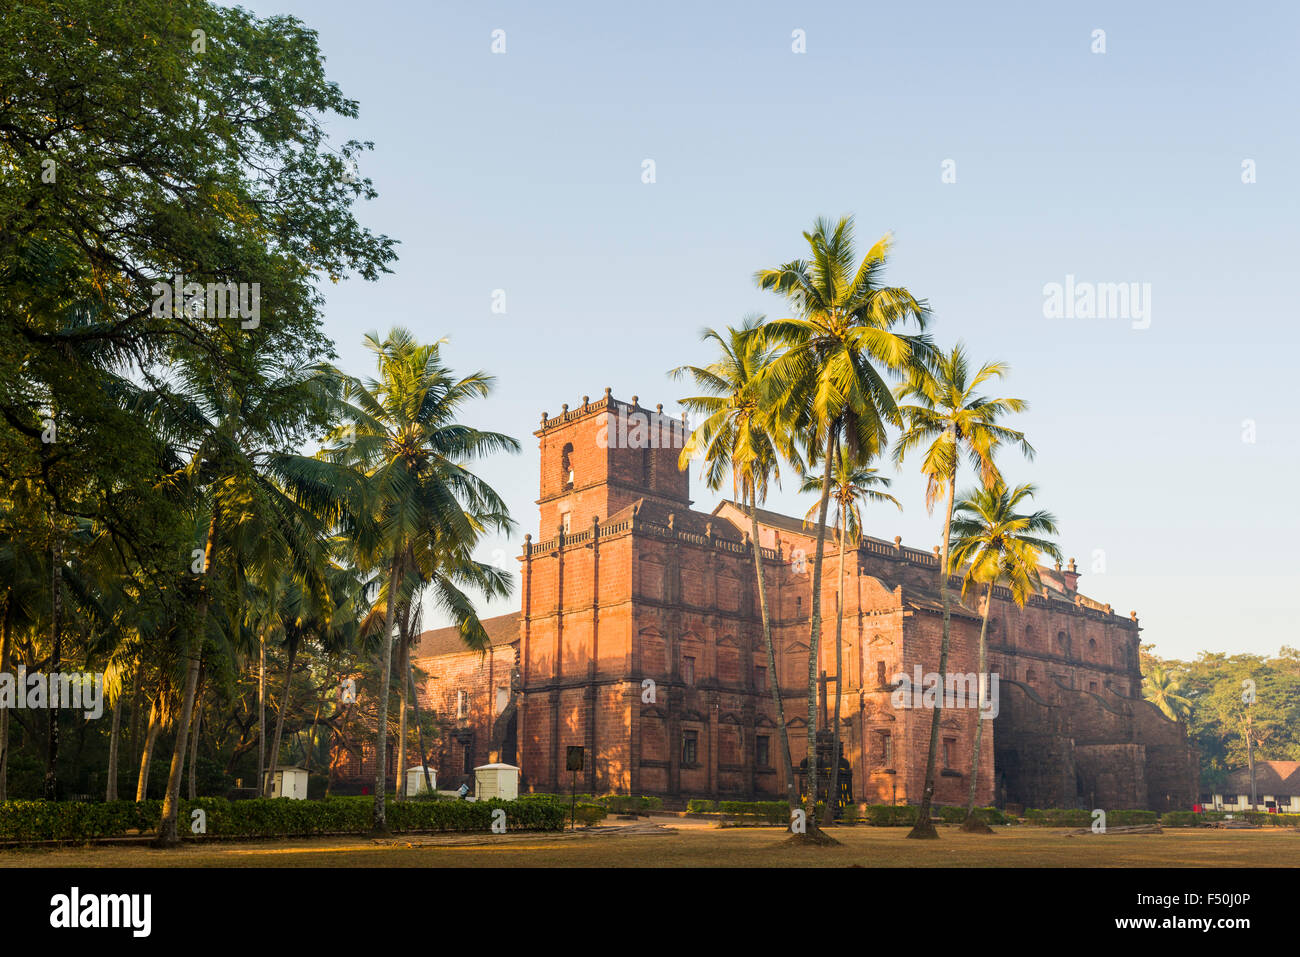 The Basilika of Bom Jesus in Old Goa, one of the remaining big buildings built by the Portuguese in 16th century, when Goa becam Stock Photo